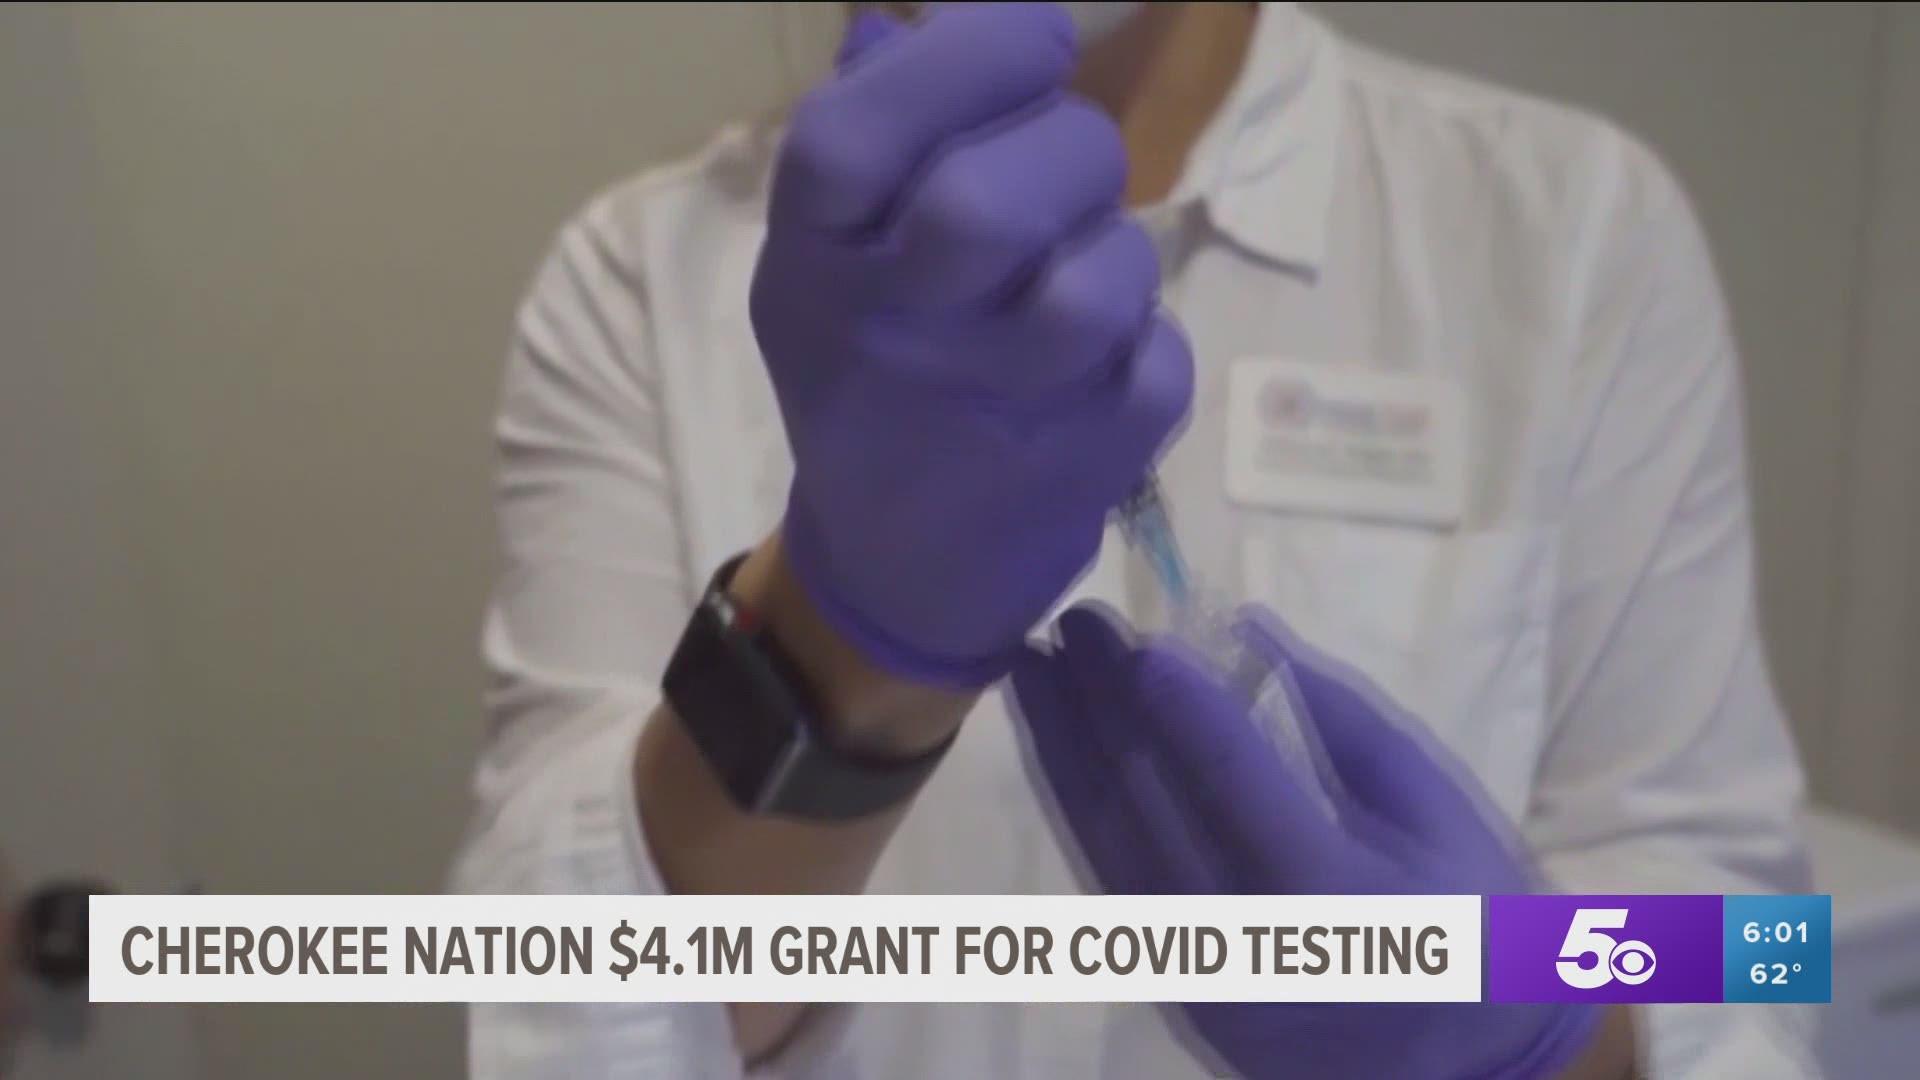 Cherokee Nation Health Services has reported about 4,500 positive cases of COVID-19 in its health system as of Nov. 16. https://bit.ly/3kLuqmS